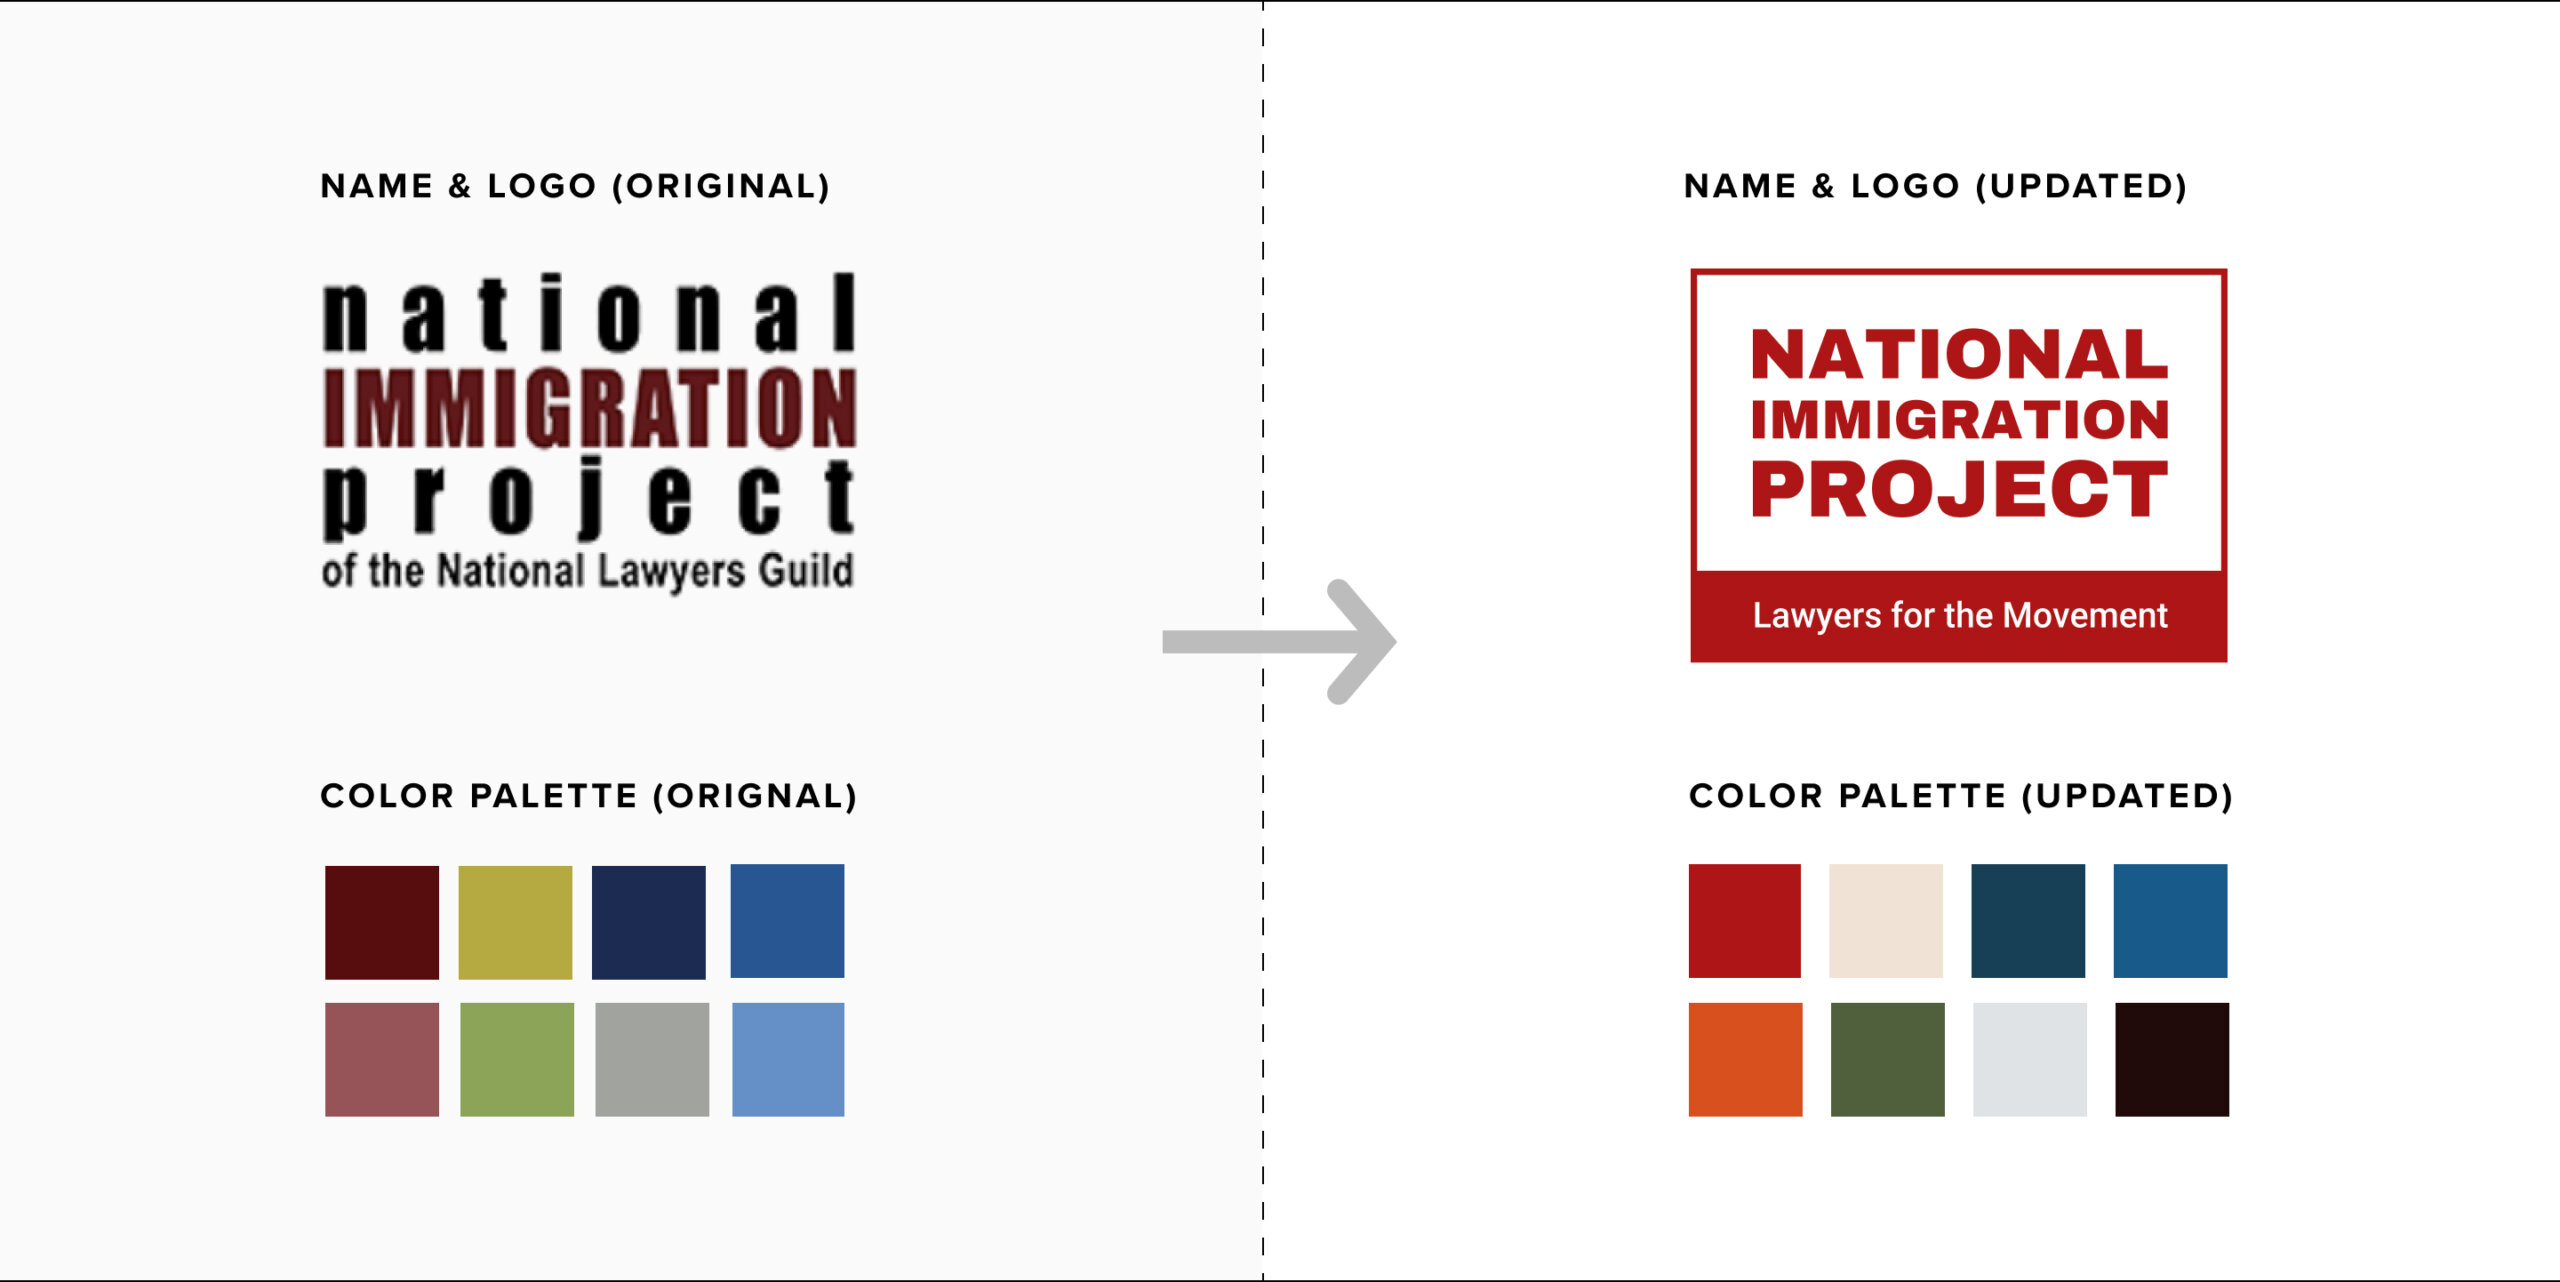 national immigration projects logo redesign transformation